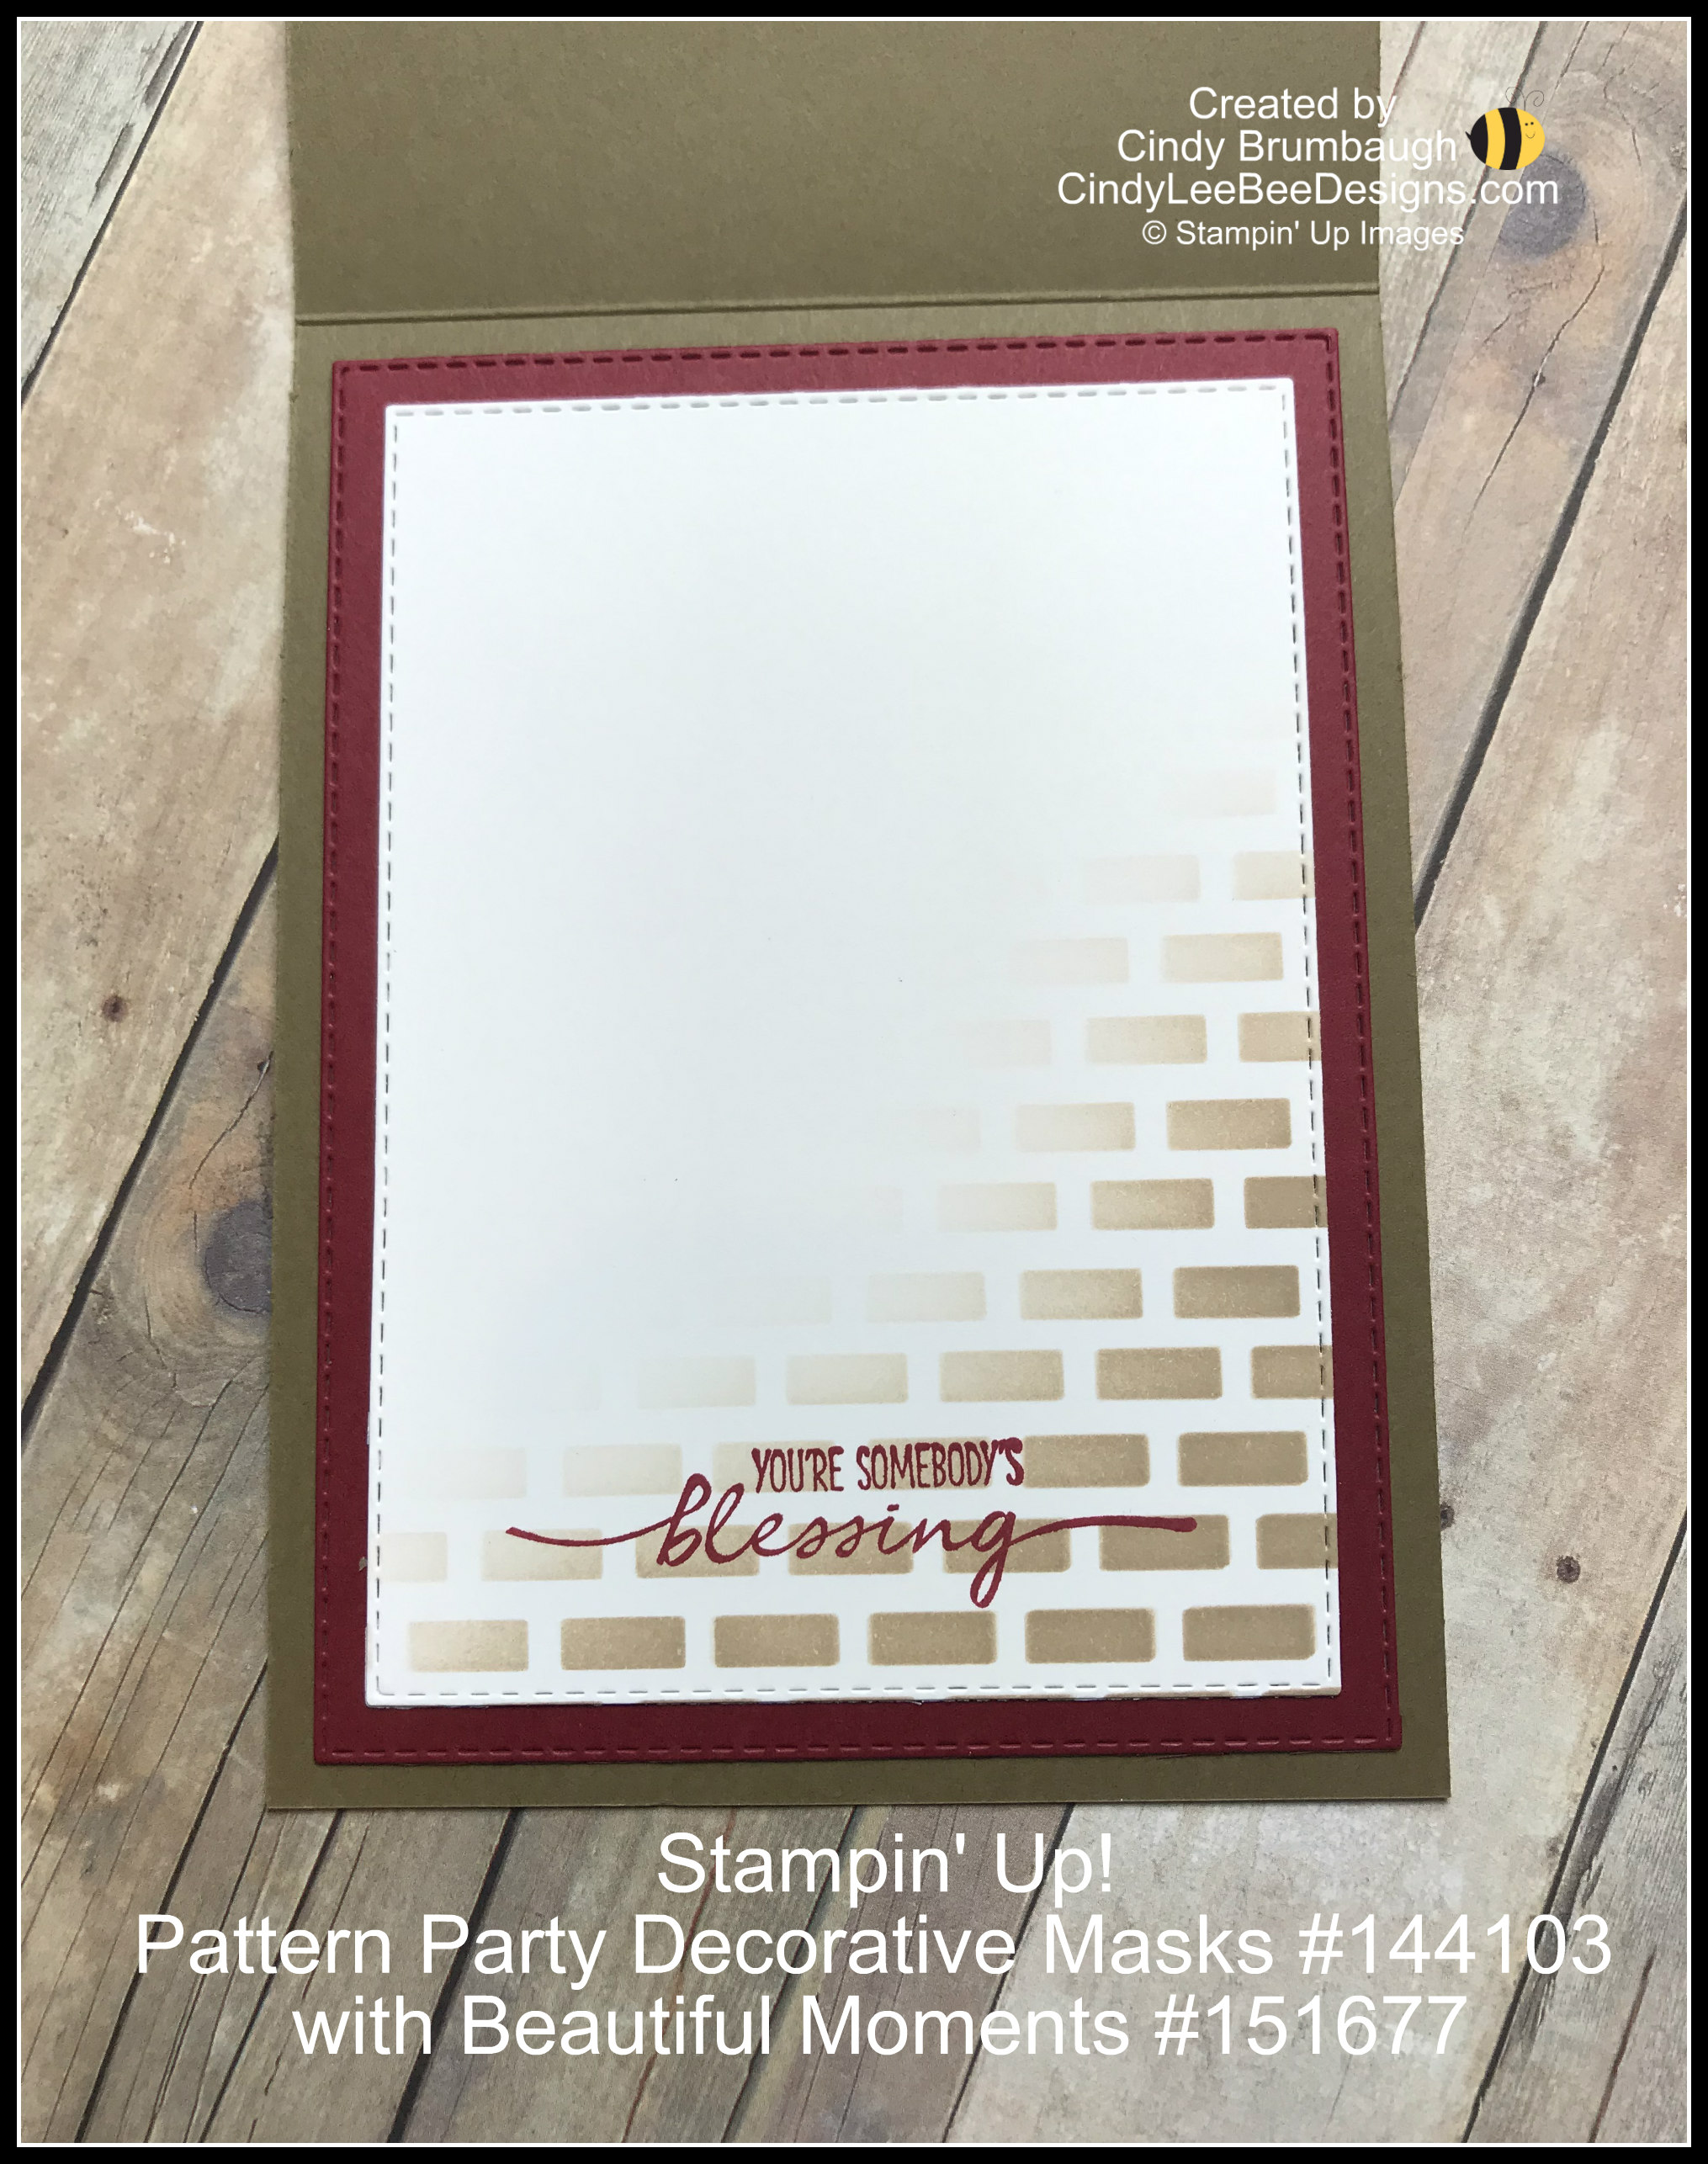 Stampin' UP! Softly Sophisticated Bundle with Thoughtful Expressions Dies